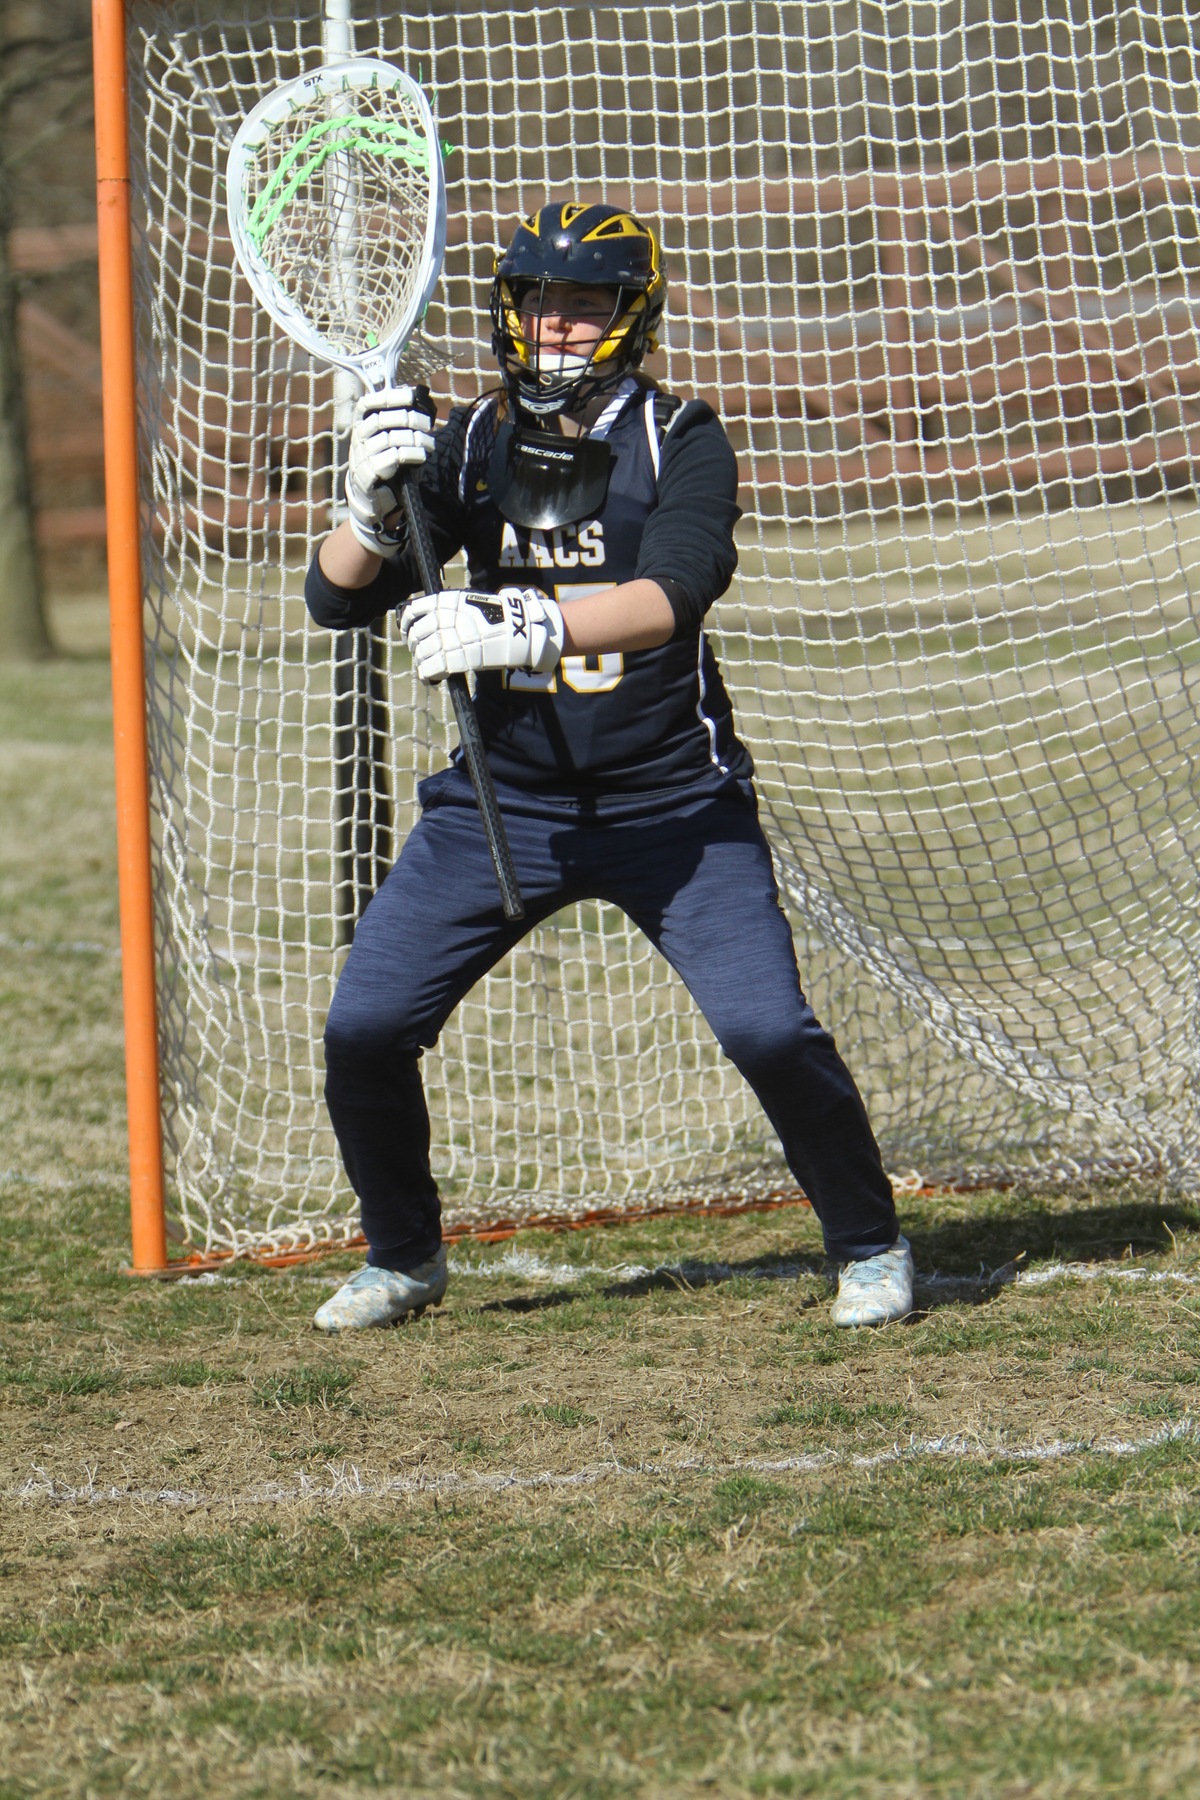 Girls Lacrosse Remains In 1st After Win Over Catholic